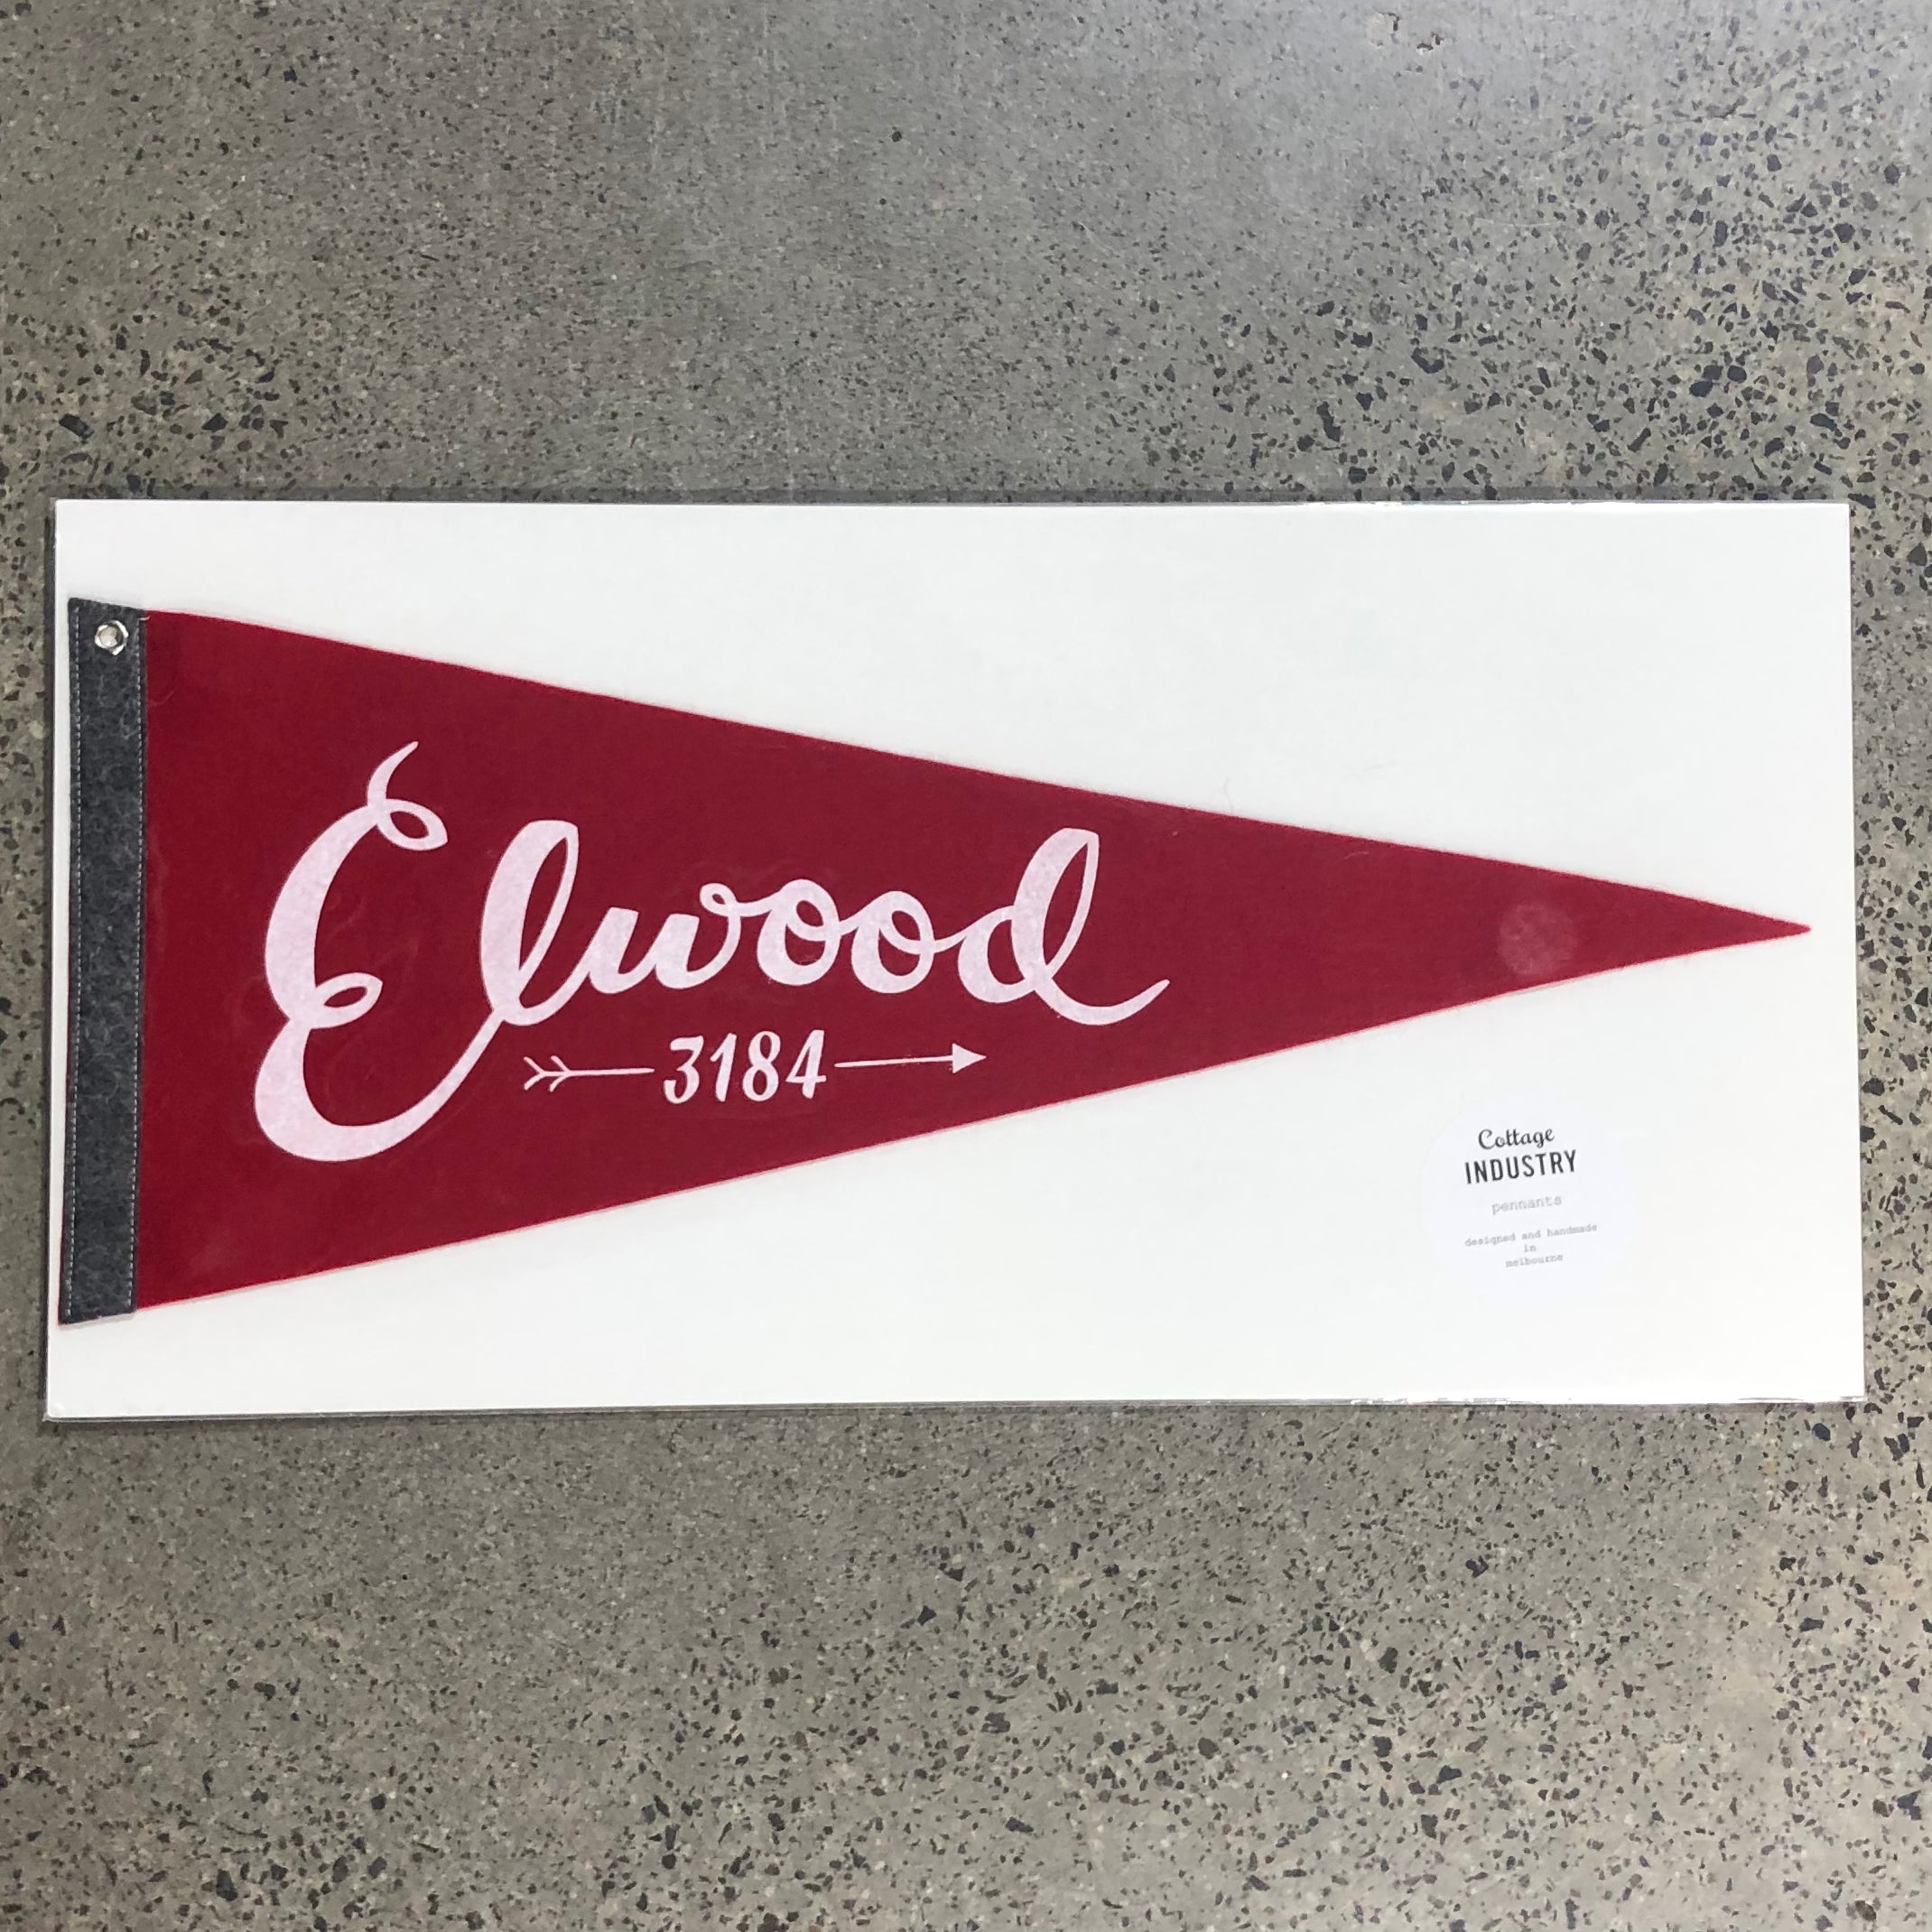 Pennant Elwood in Red and Grey